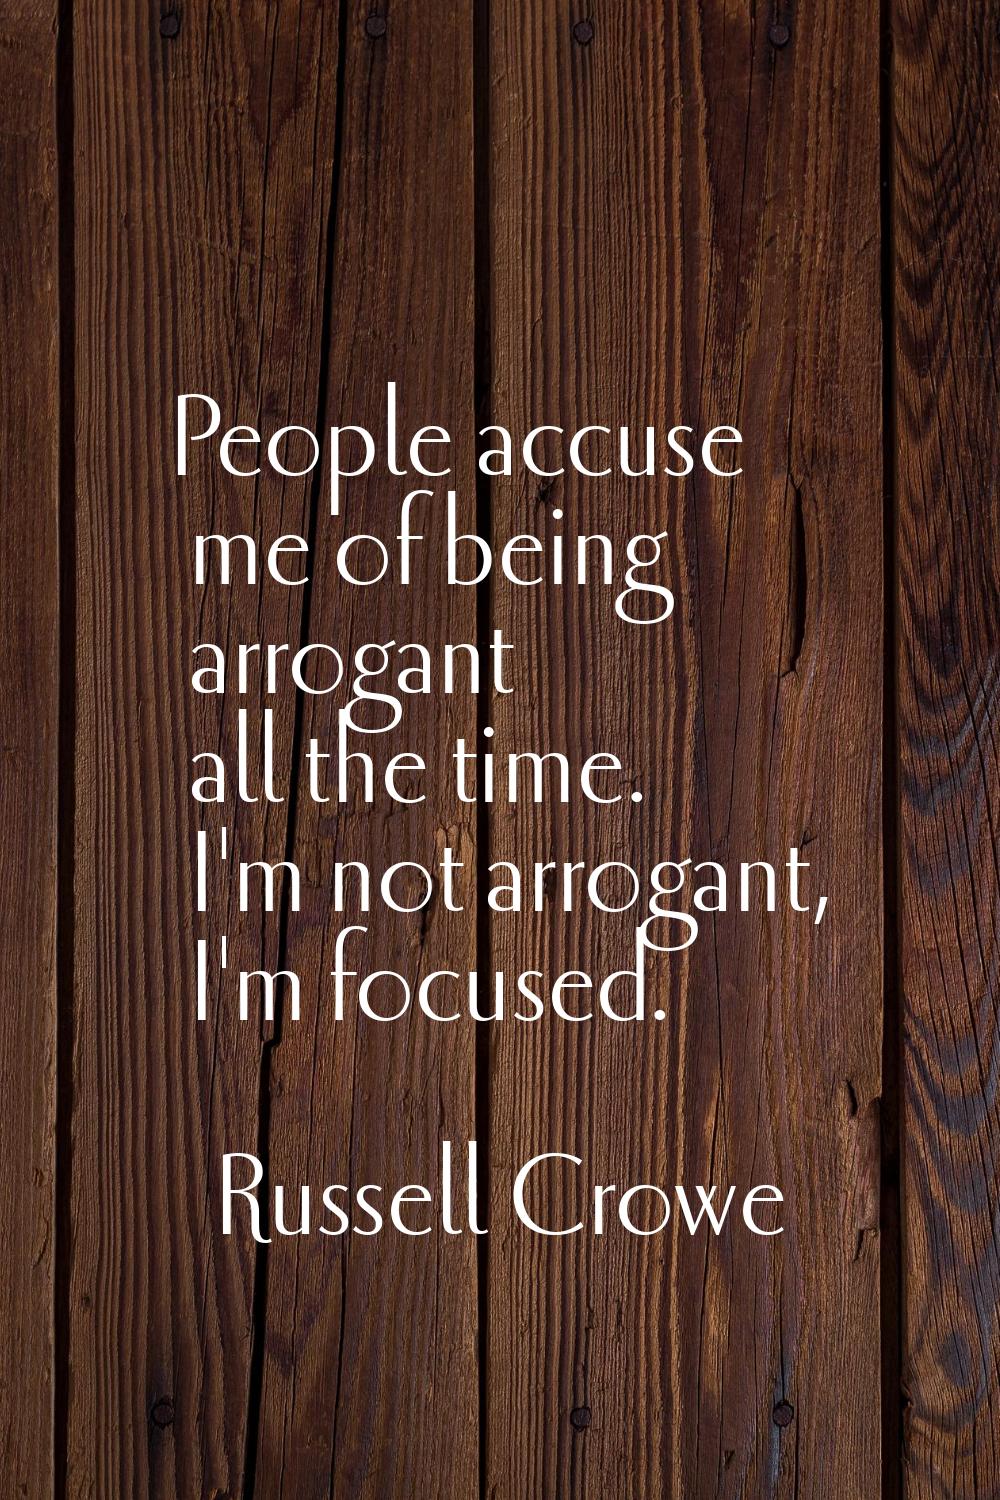 People accuse me of being arrogant all the time. I'm not arrogant, I'm focused.